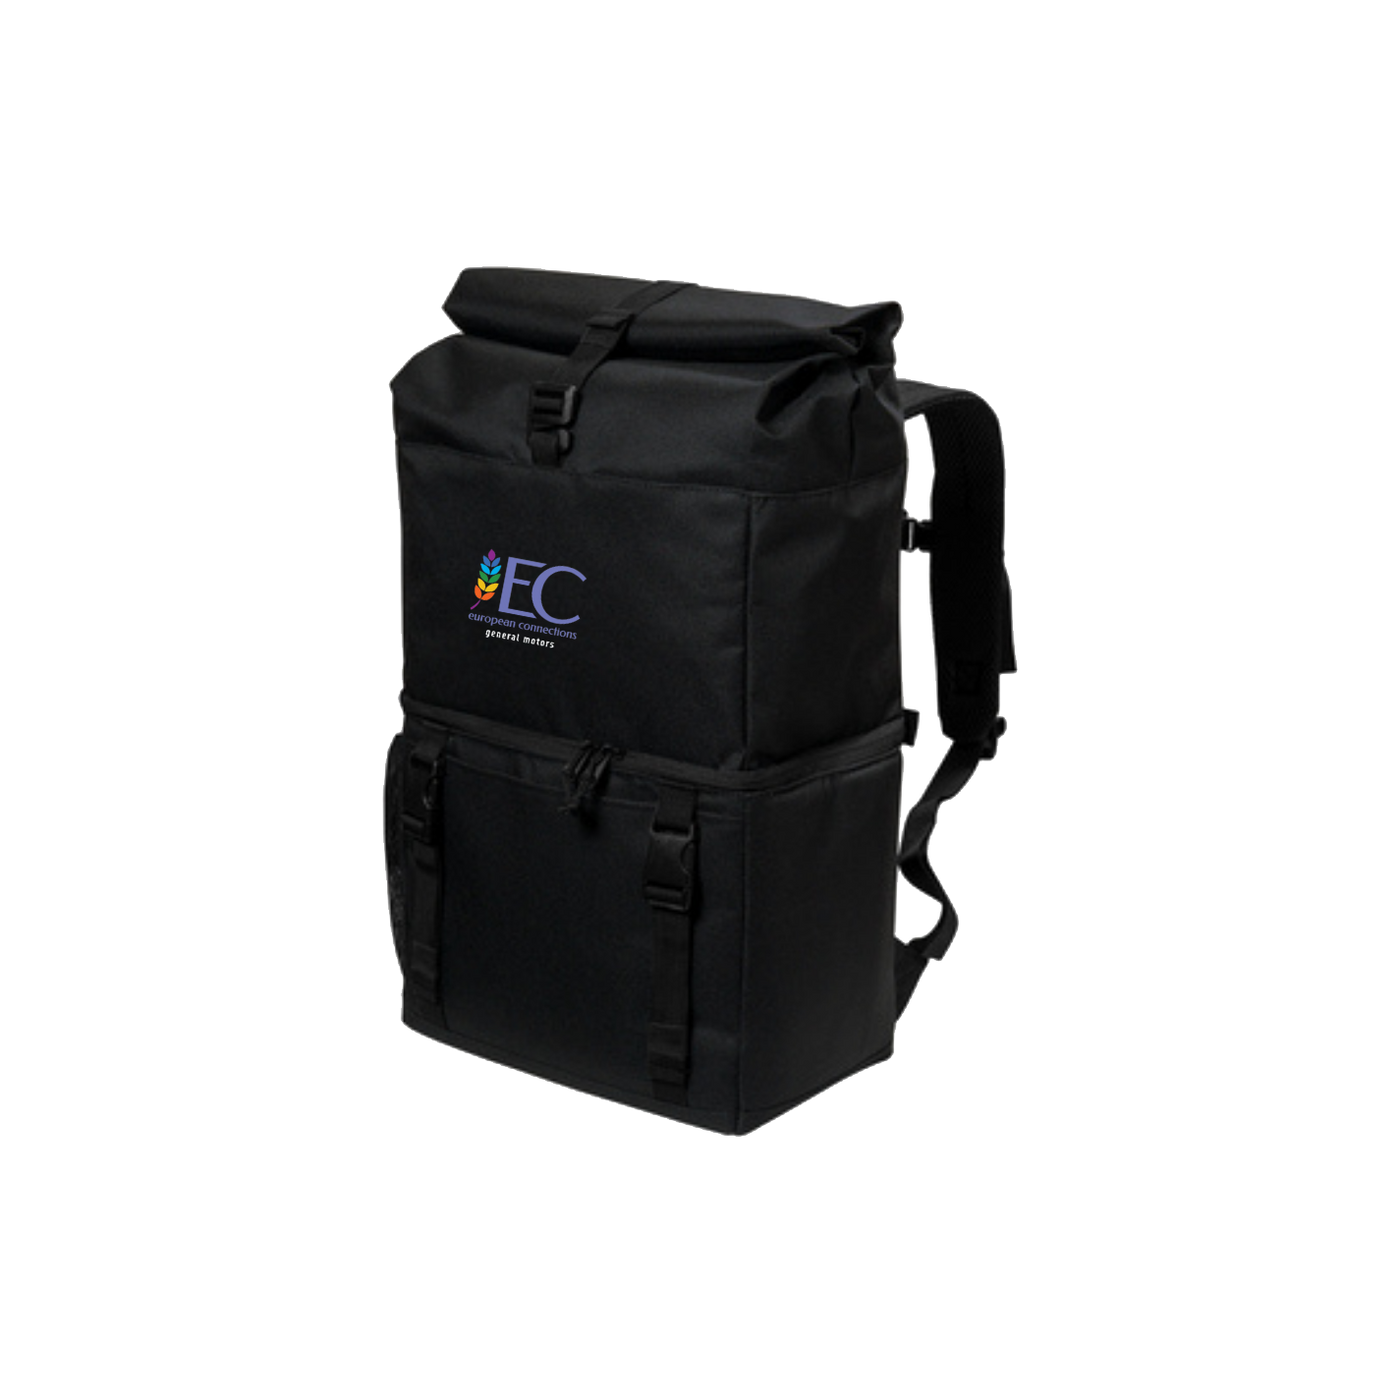 GM European Connections ERG Backpack Cooler